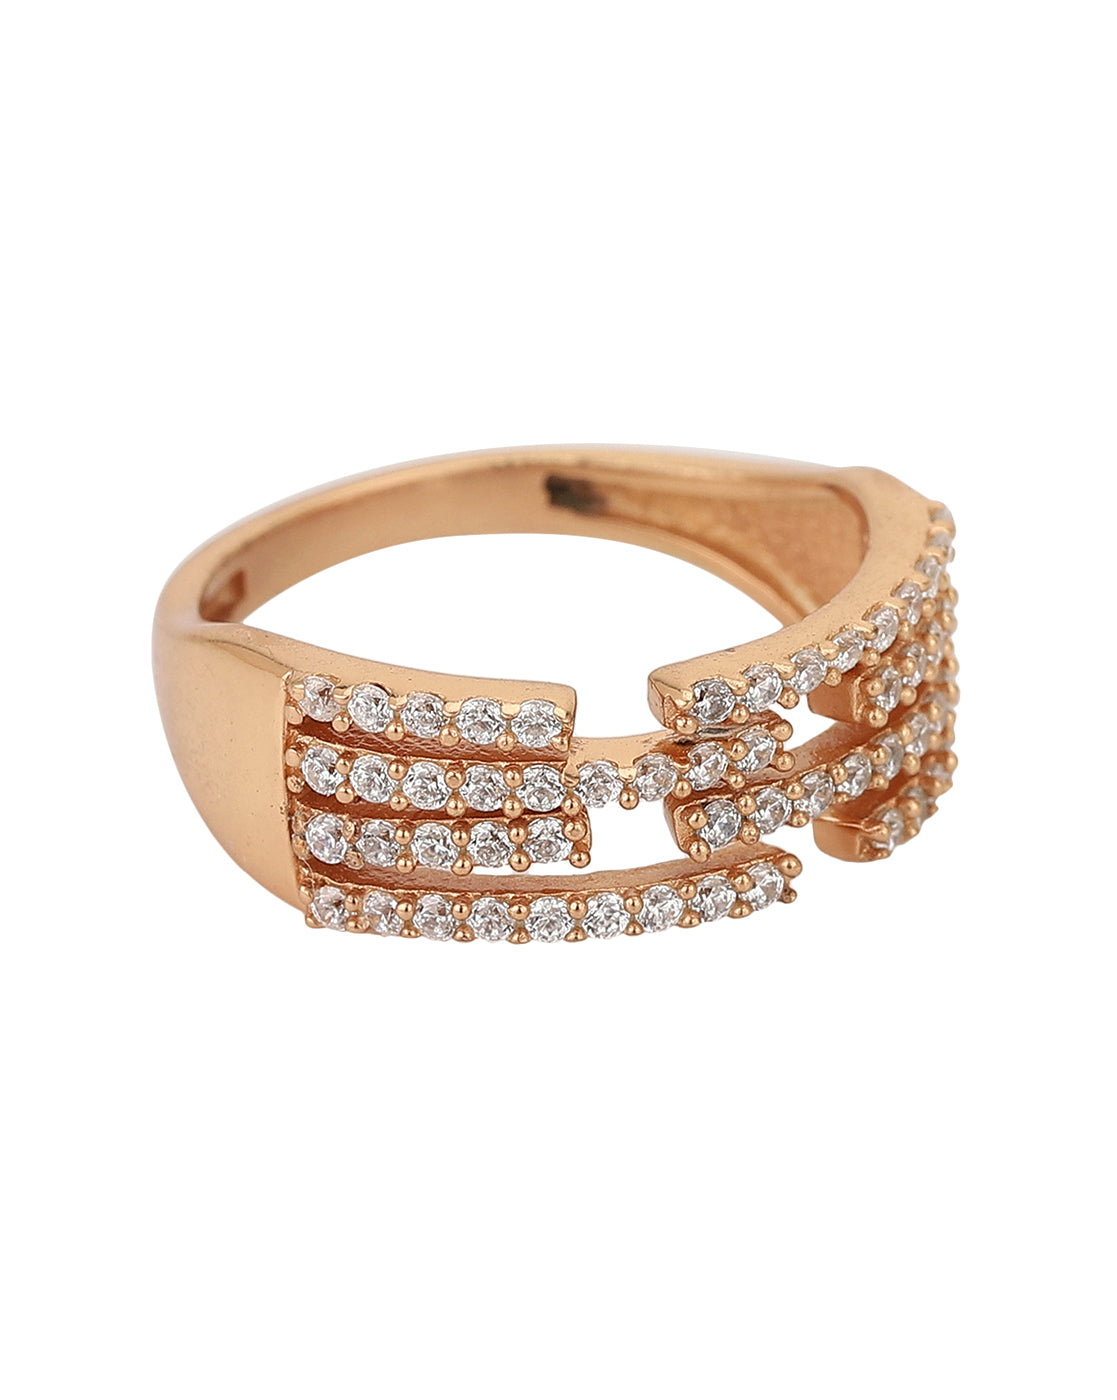 Carlton London Rose Gold Plated Cz Studded Adjustable Contemporary Finger Ring For Women